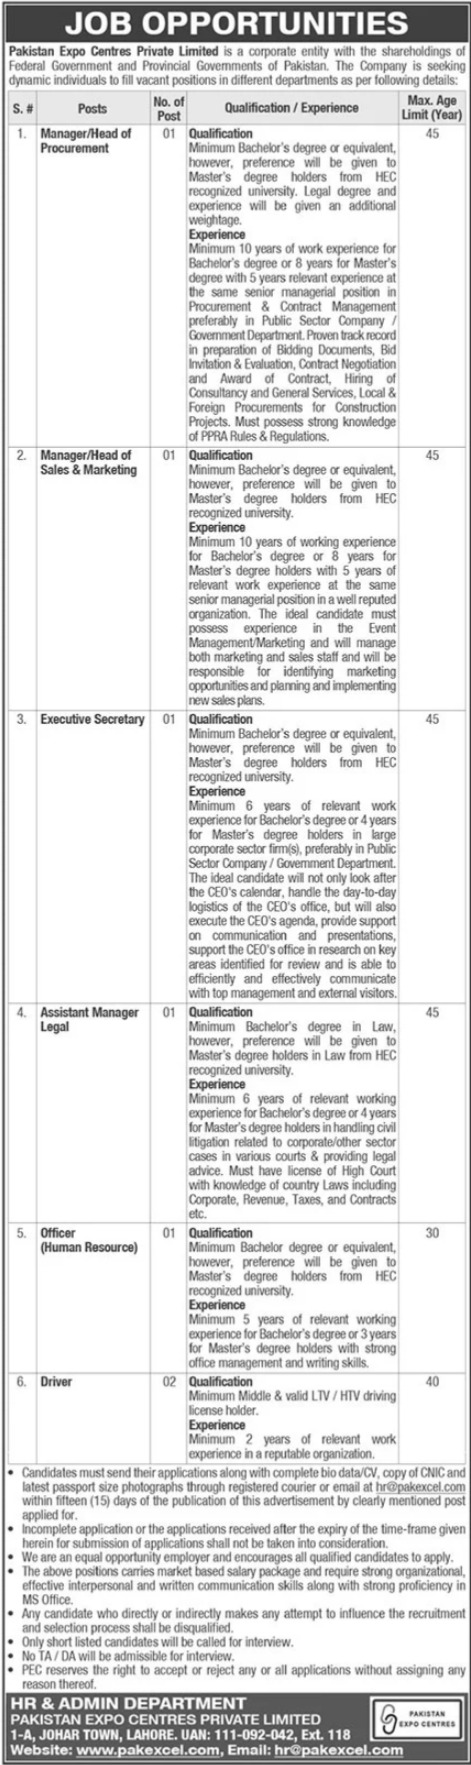 Pakistan Expo Centres Private Limited Jobs 2022 – www.pakexcel.com